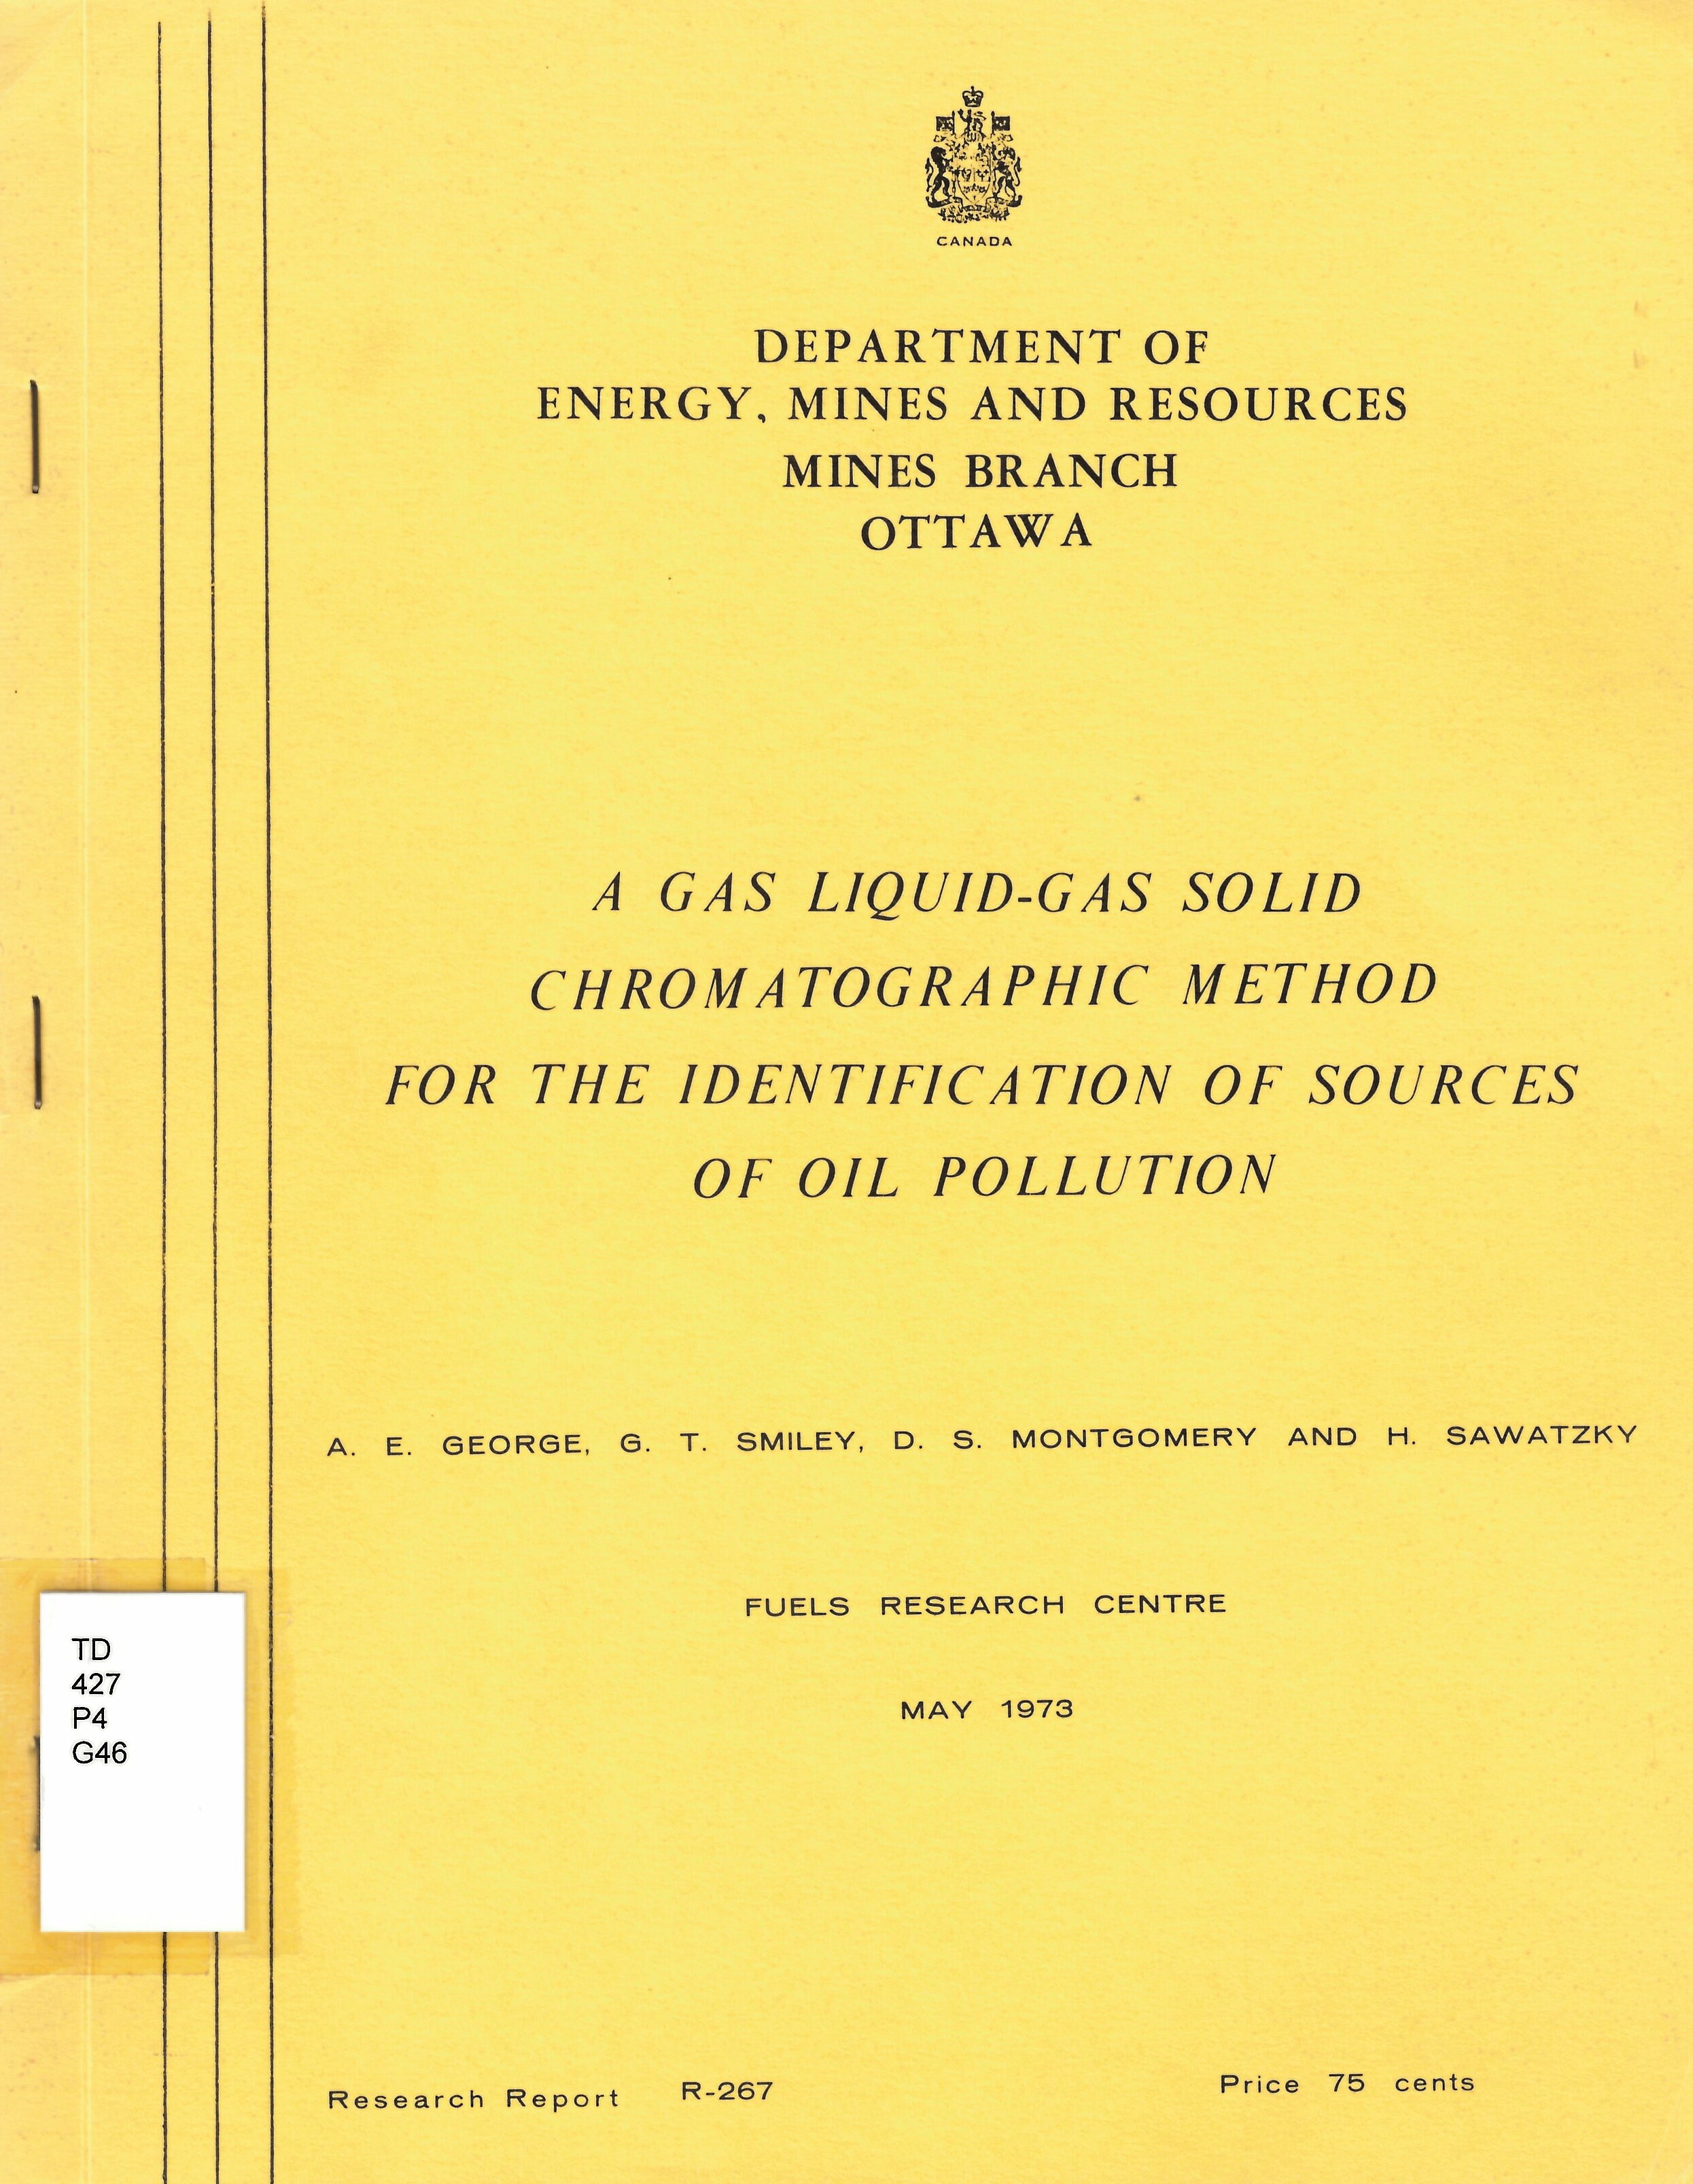 Gas liquid-gas solid chromatographic method for the identification  of sources of oil pollution